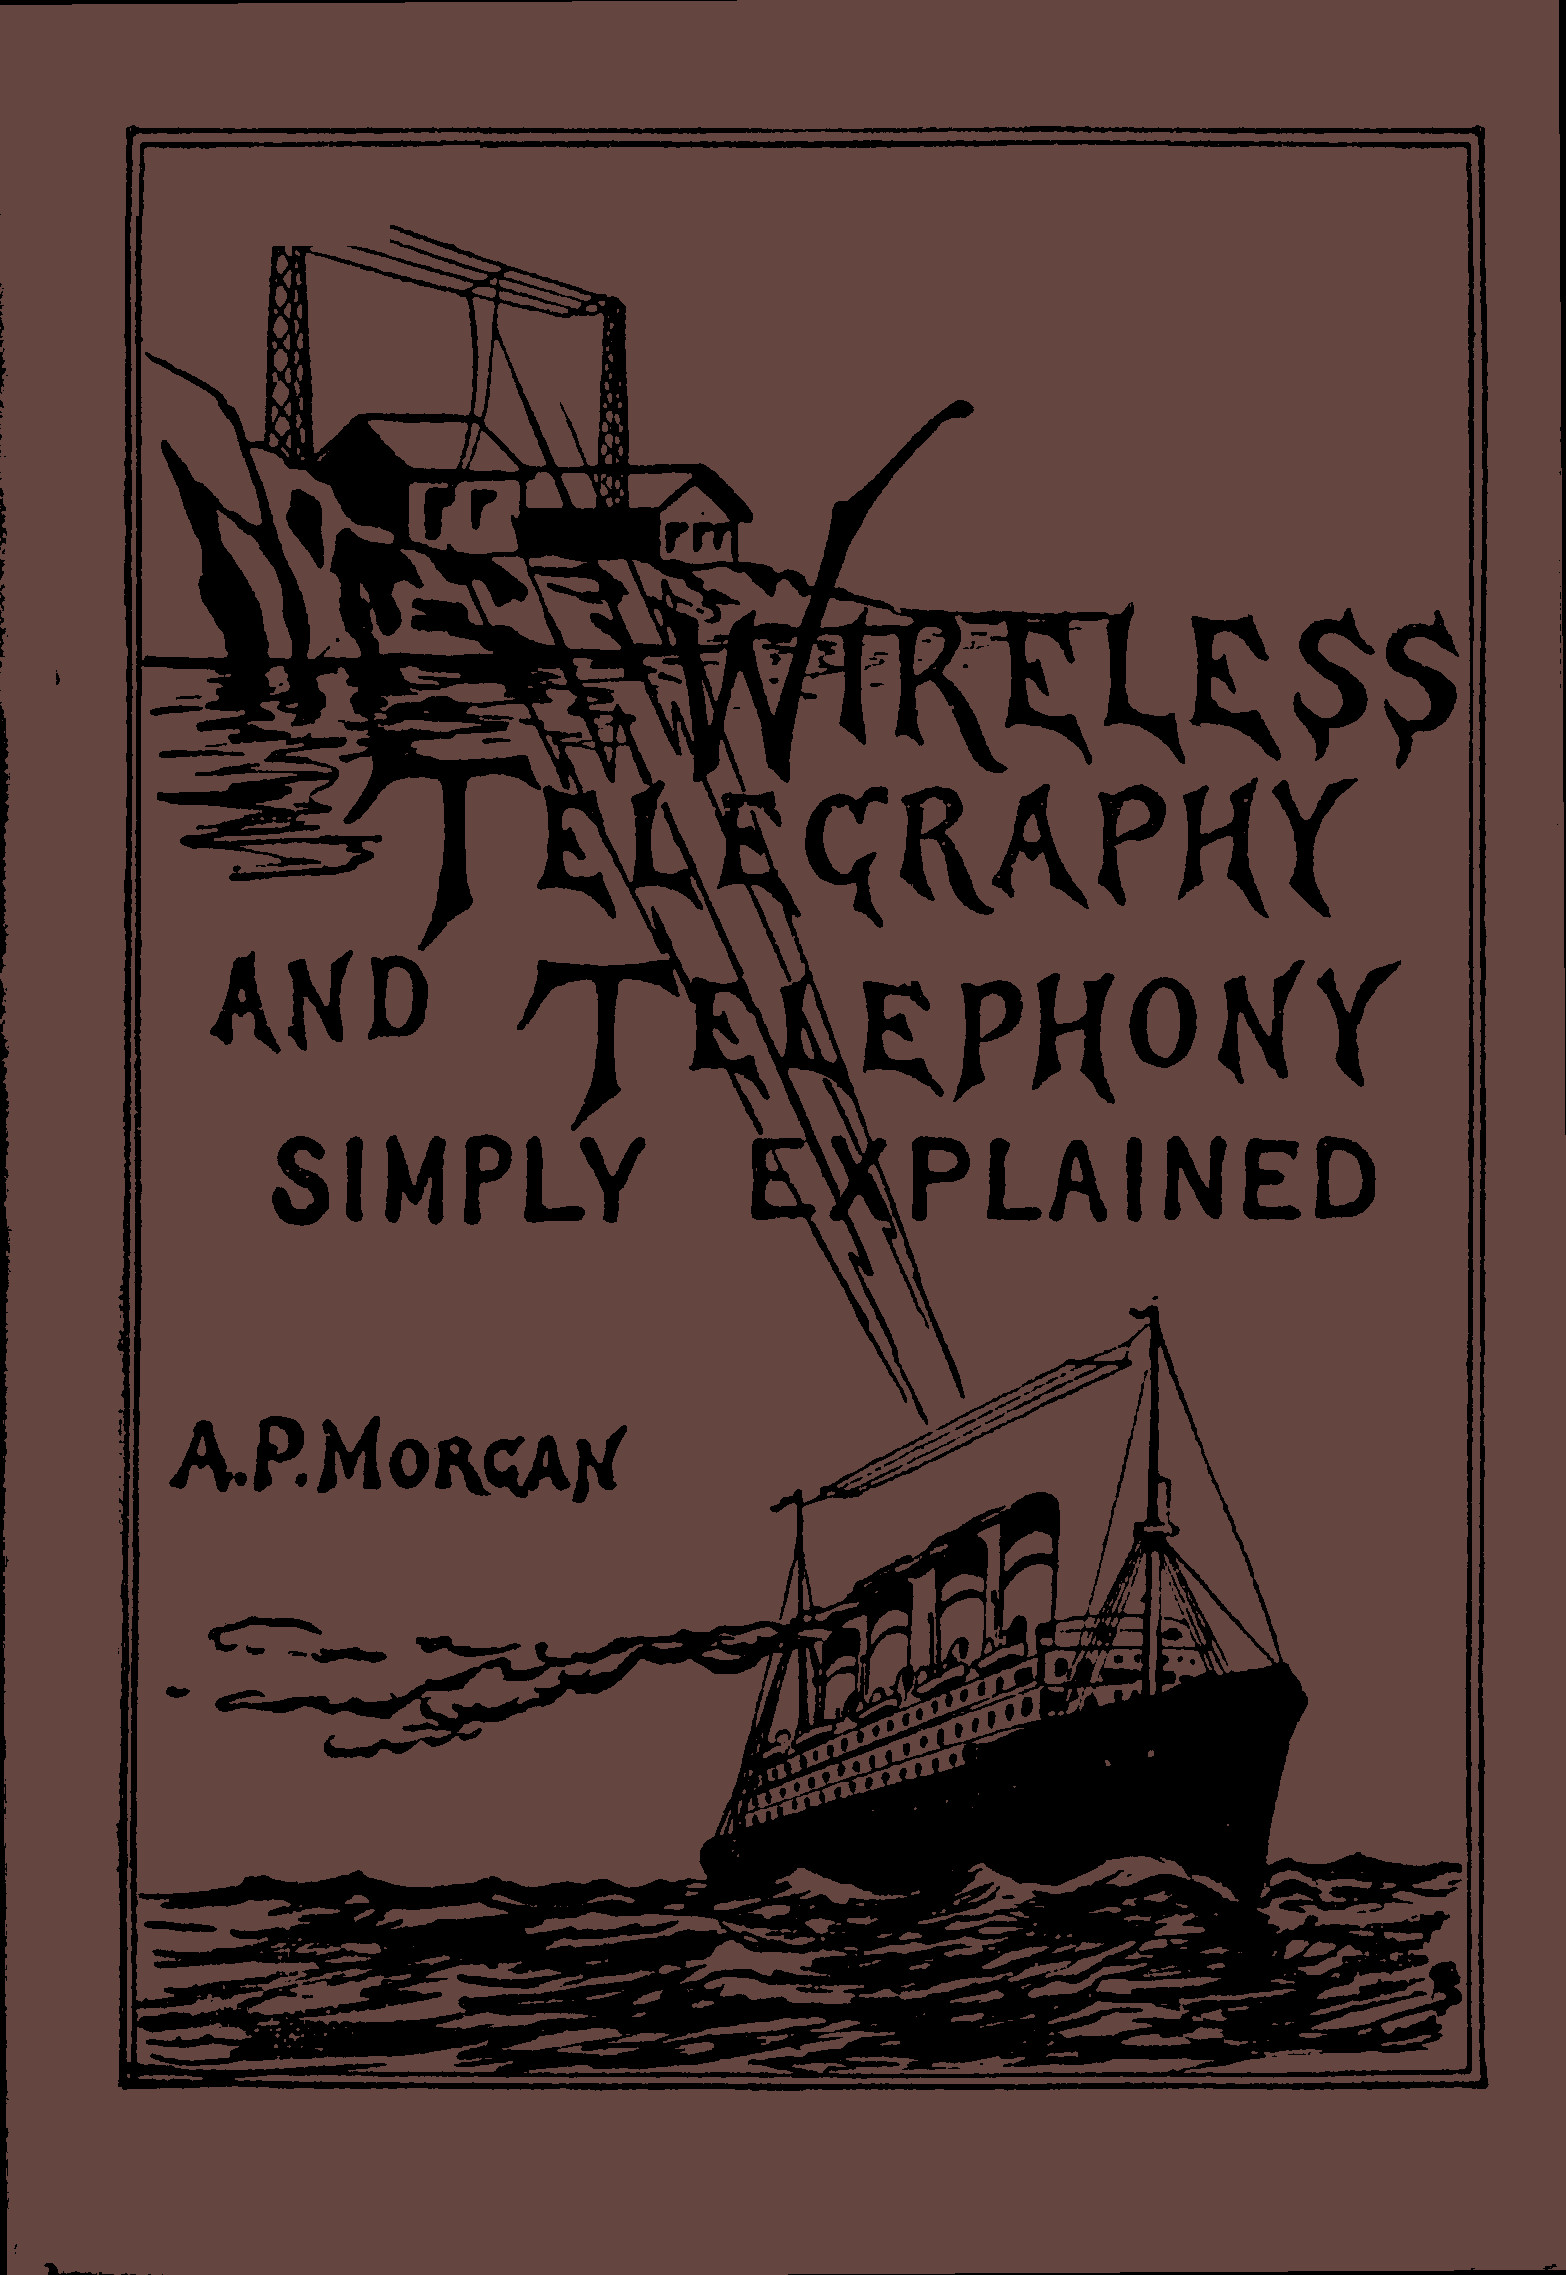 Wireless Telegraphy and Telephony Simply Explained&#10;A Practical Treatise Embracing Complete and Detailed Explanations of the Theory and Practice of Modern Radio Apparatus and Its Present Day Applications, Together With a Chapter on the Possibilities of Its Future Development